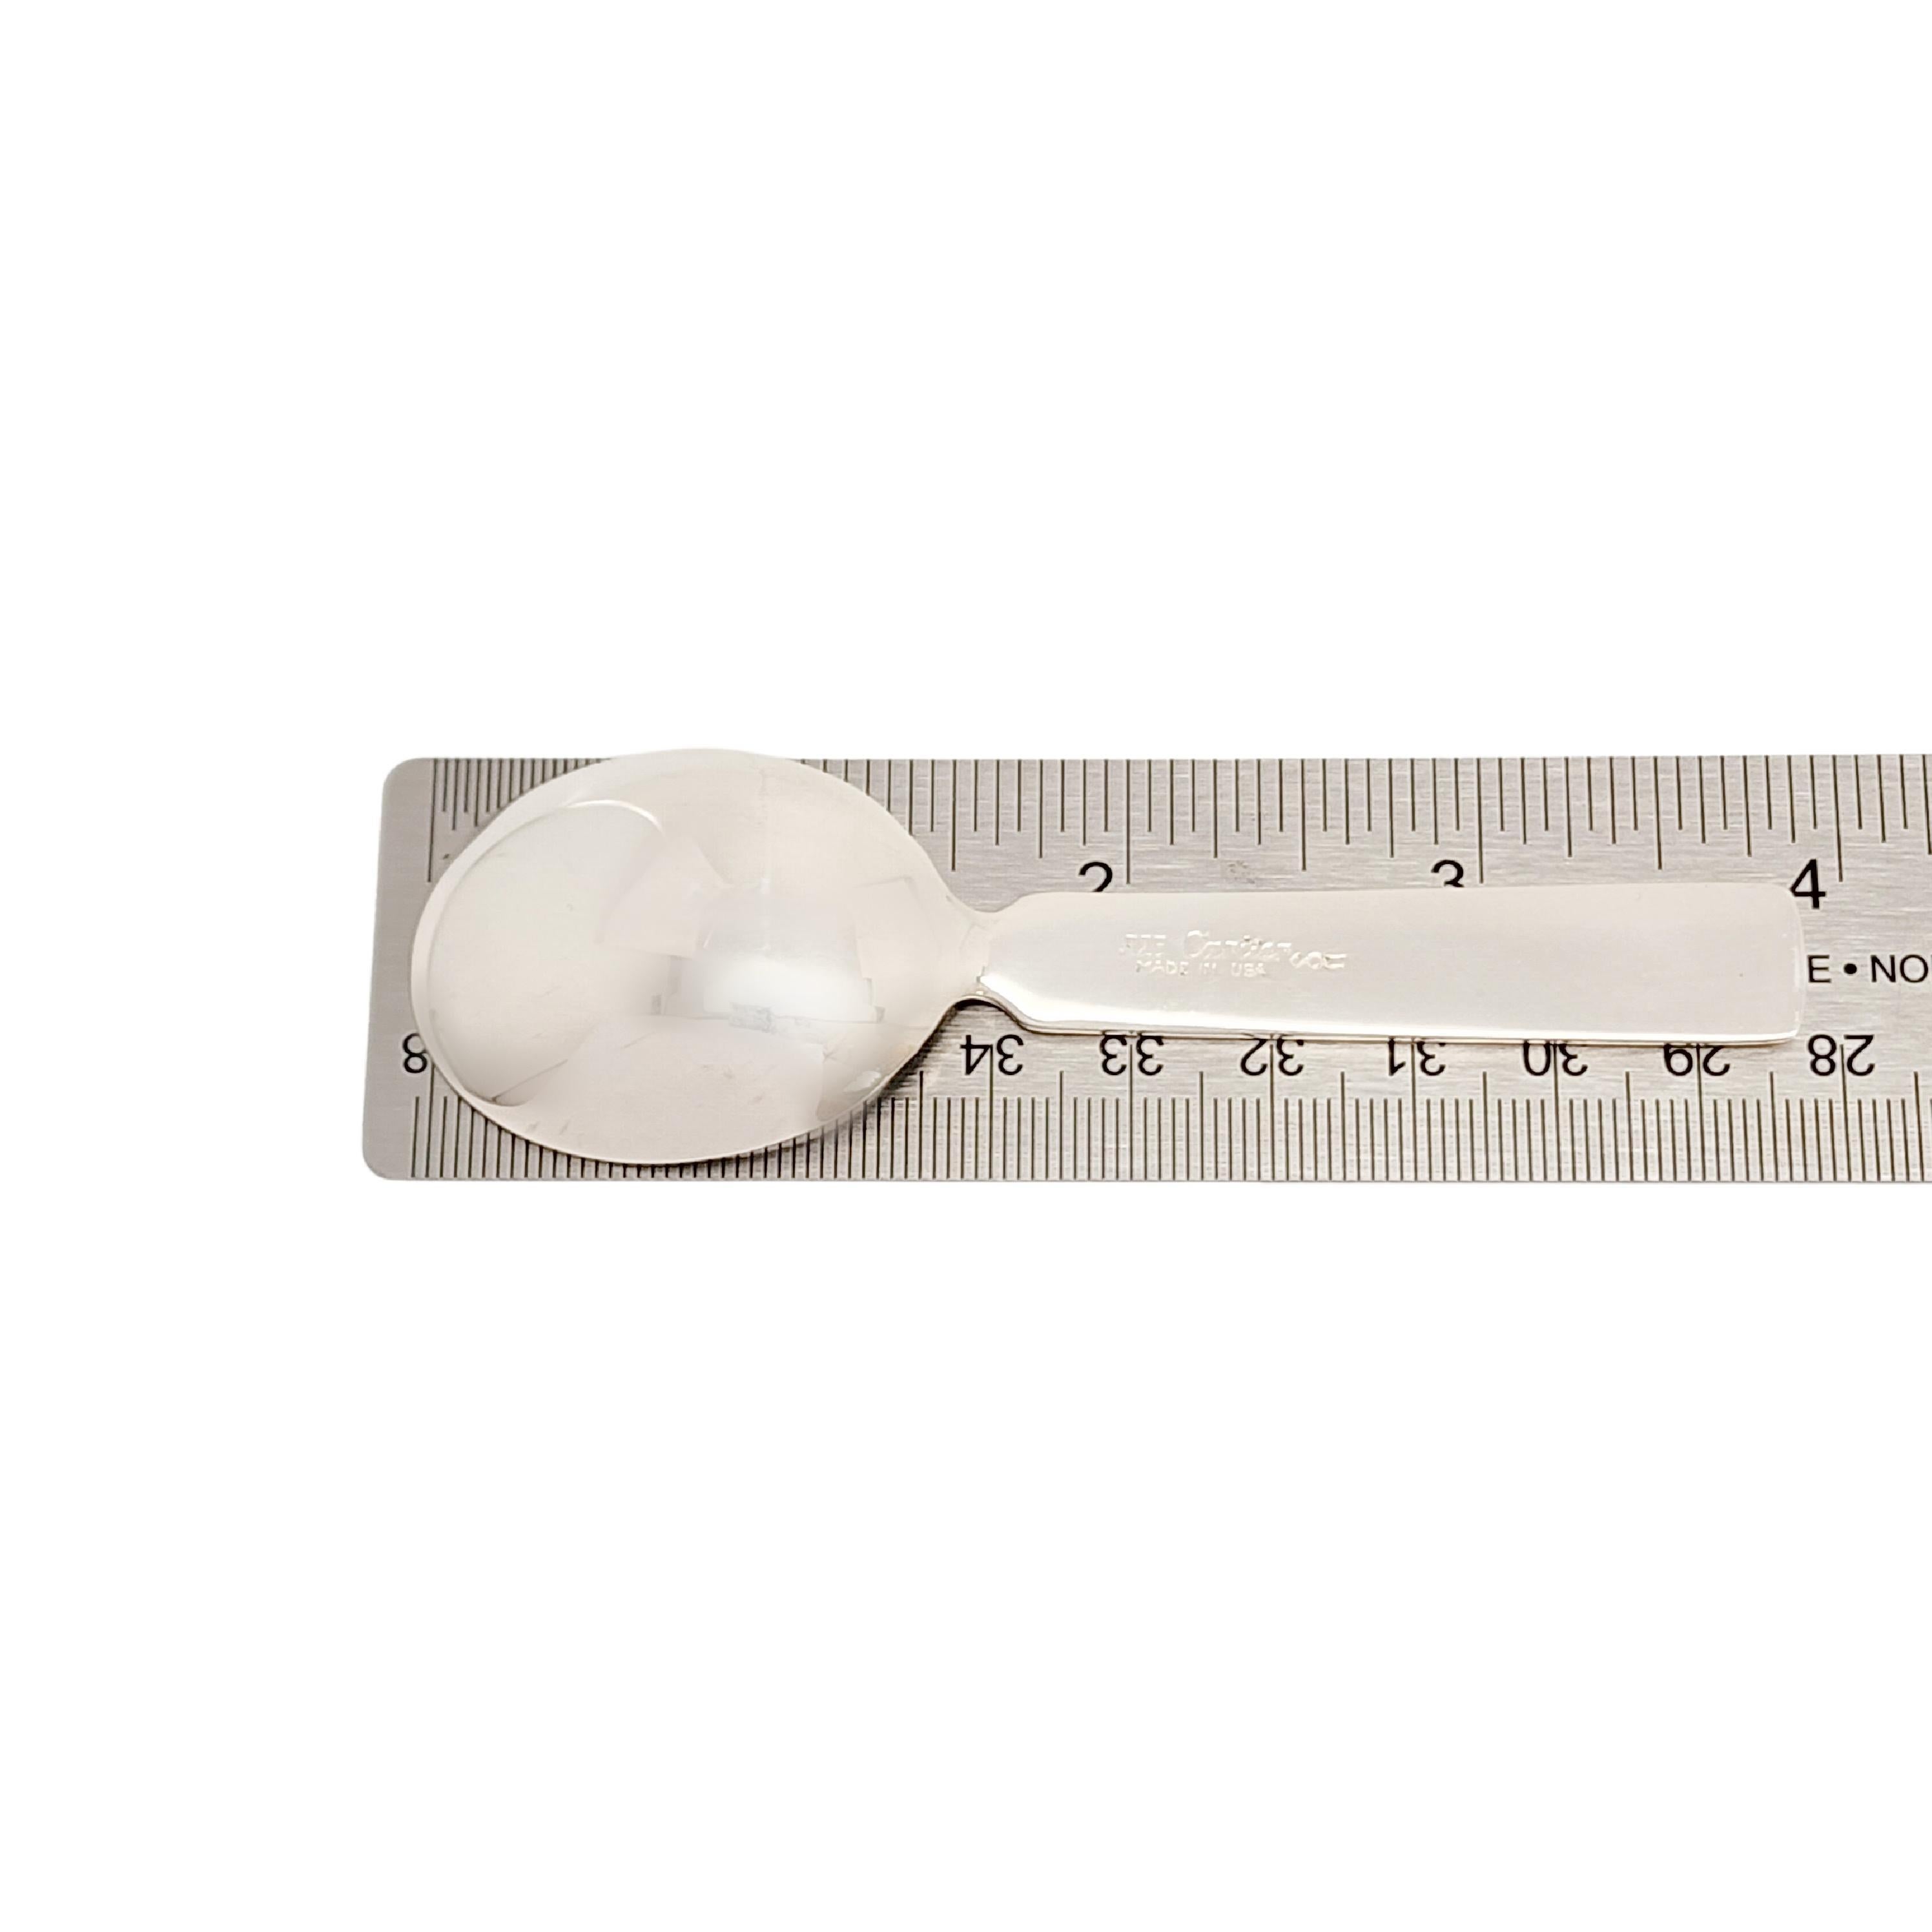 Dominick & Haff for Cartier Sterling Silver Baby Spoon #16712 For Sale 6